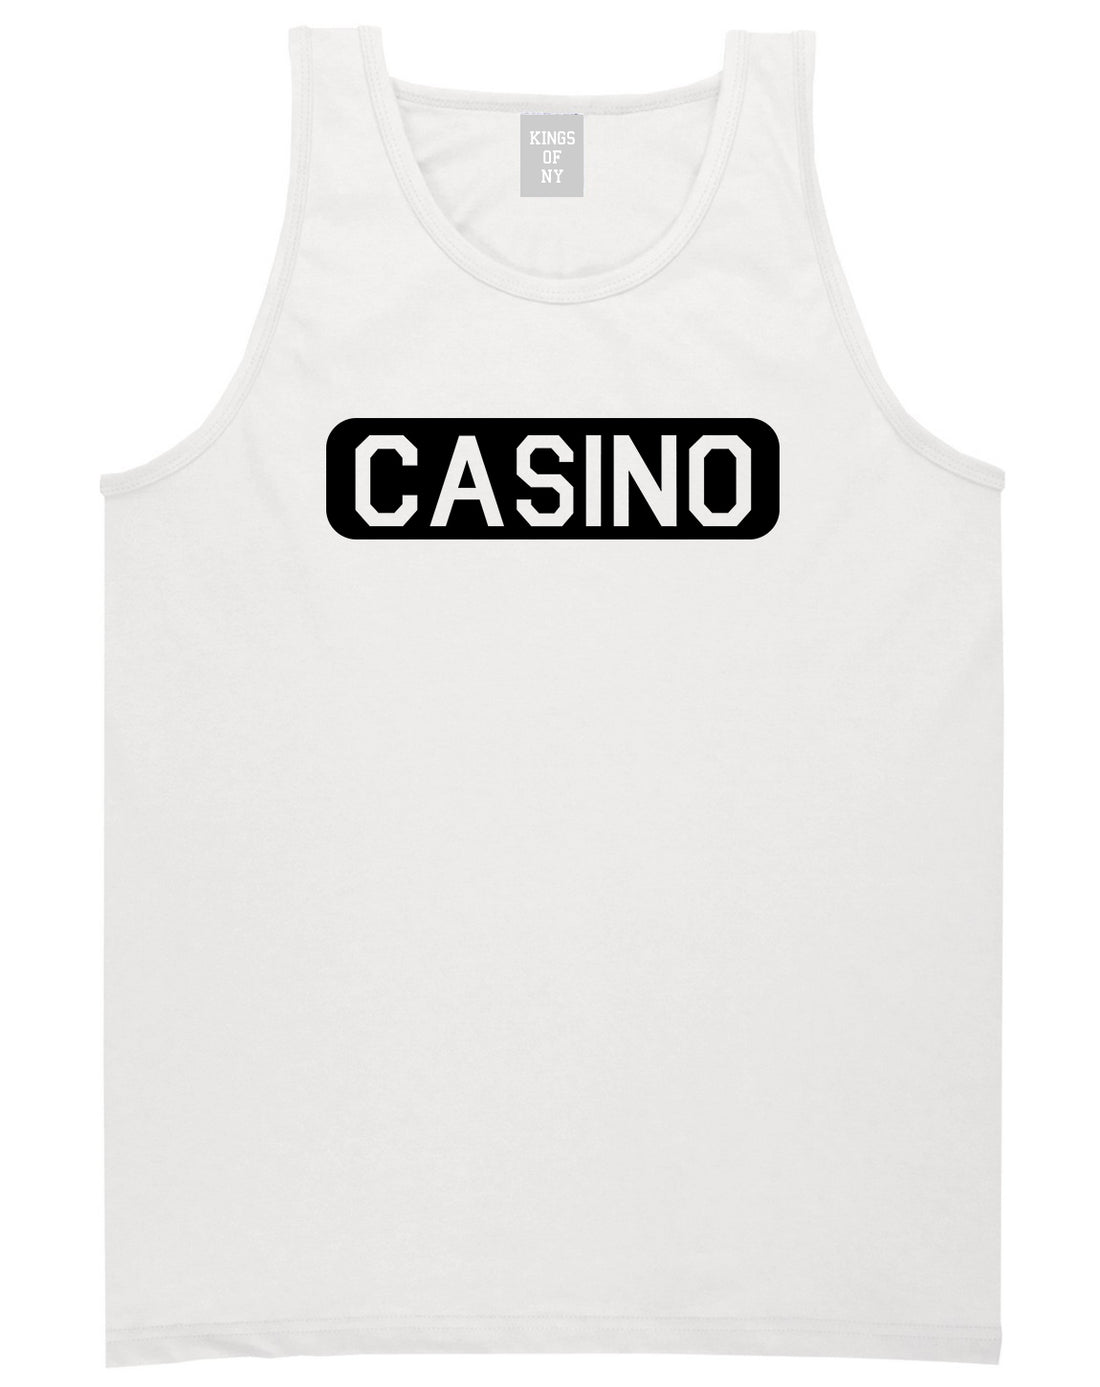 Casino White Tank Top Shirt by Kings Of NY